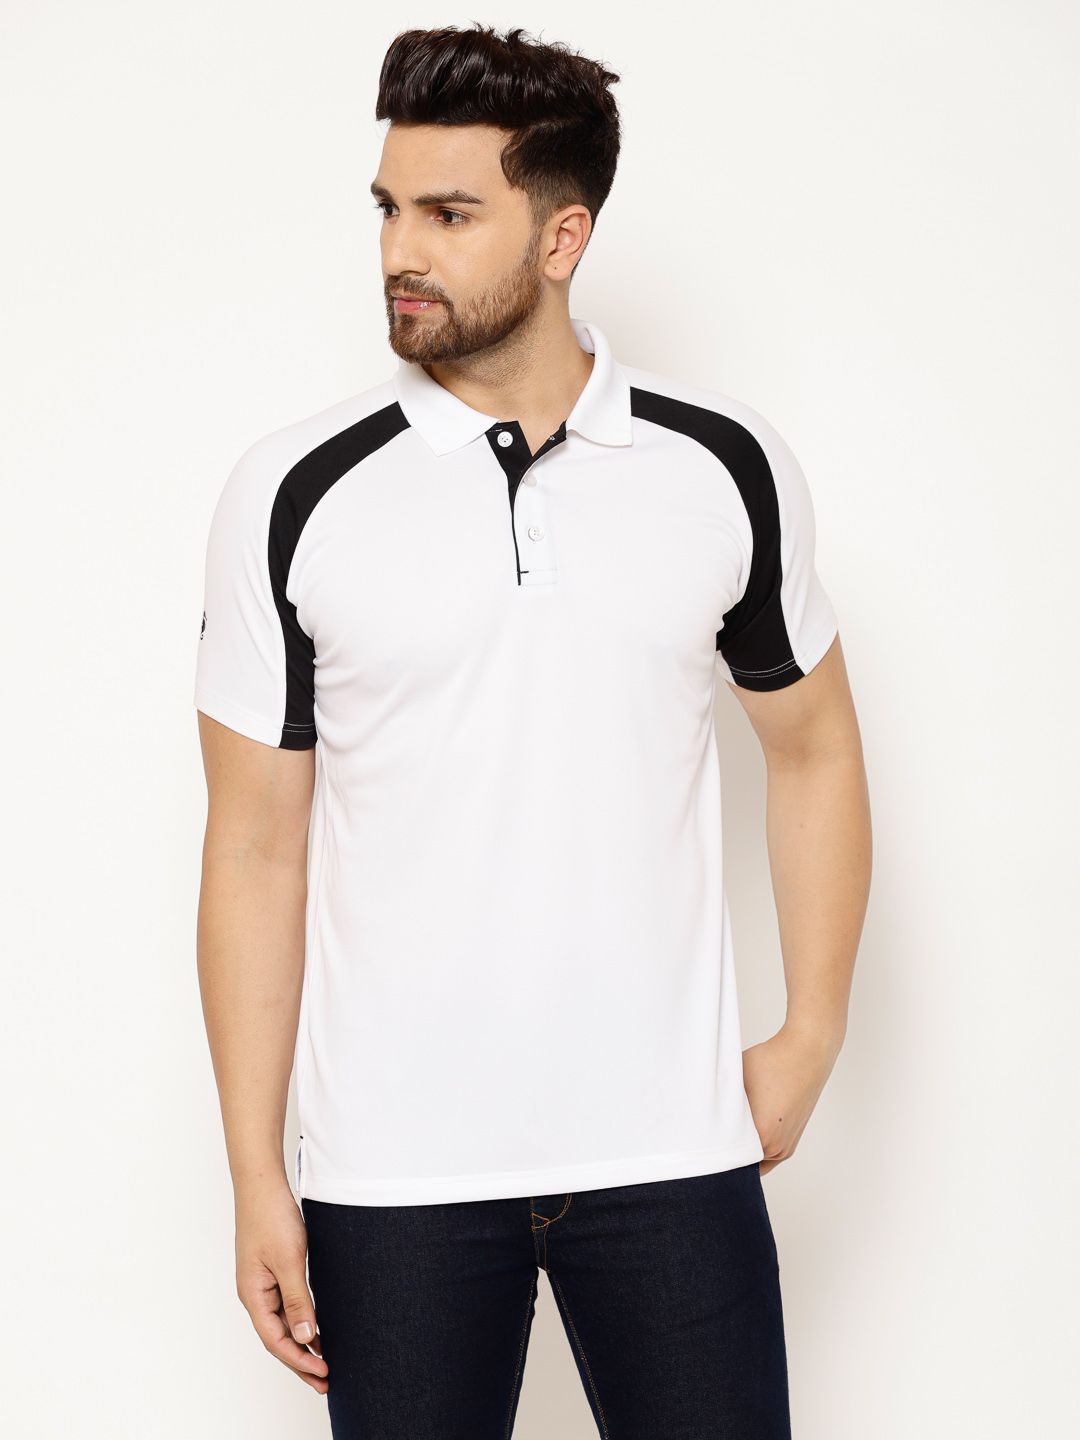     			EPPE - White Polyester Regular Fit Men's Sports Polo T-Shirt ( Pack of 1 )